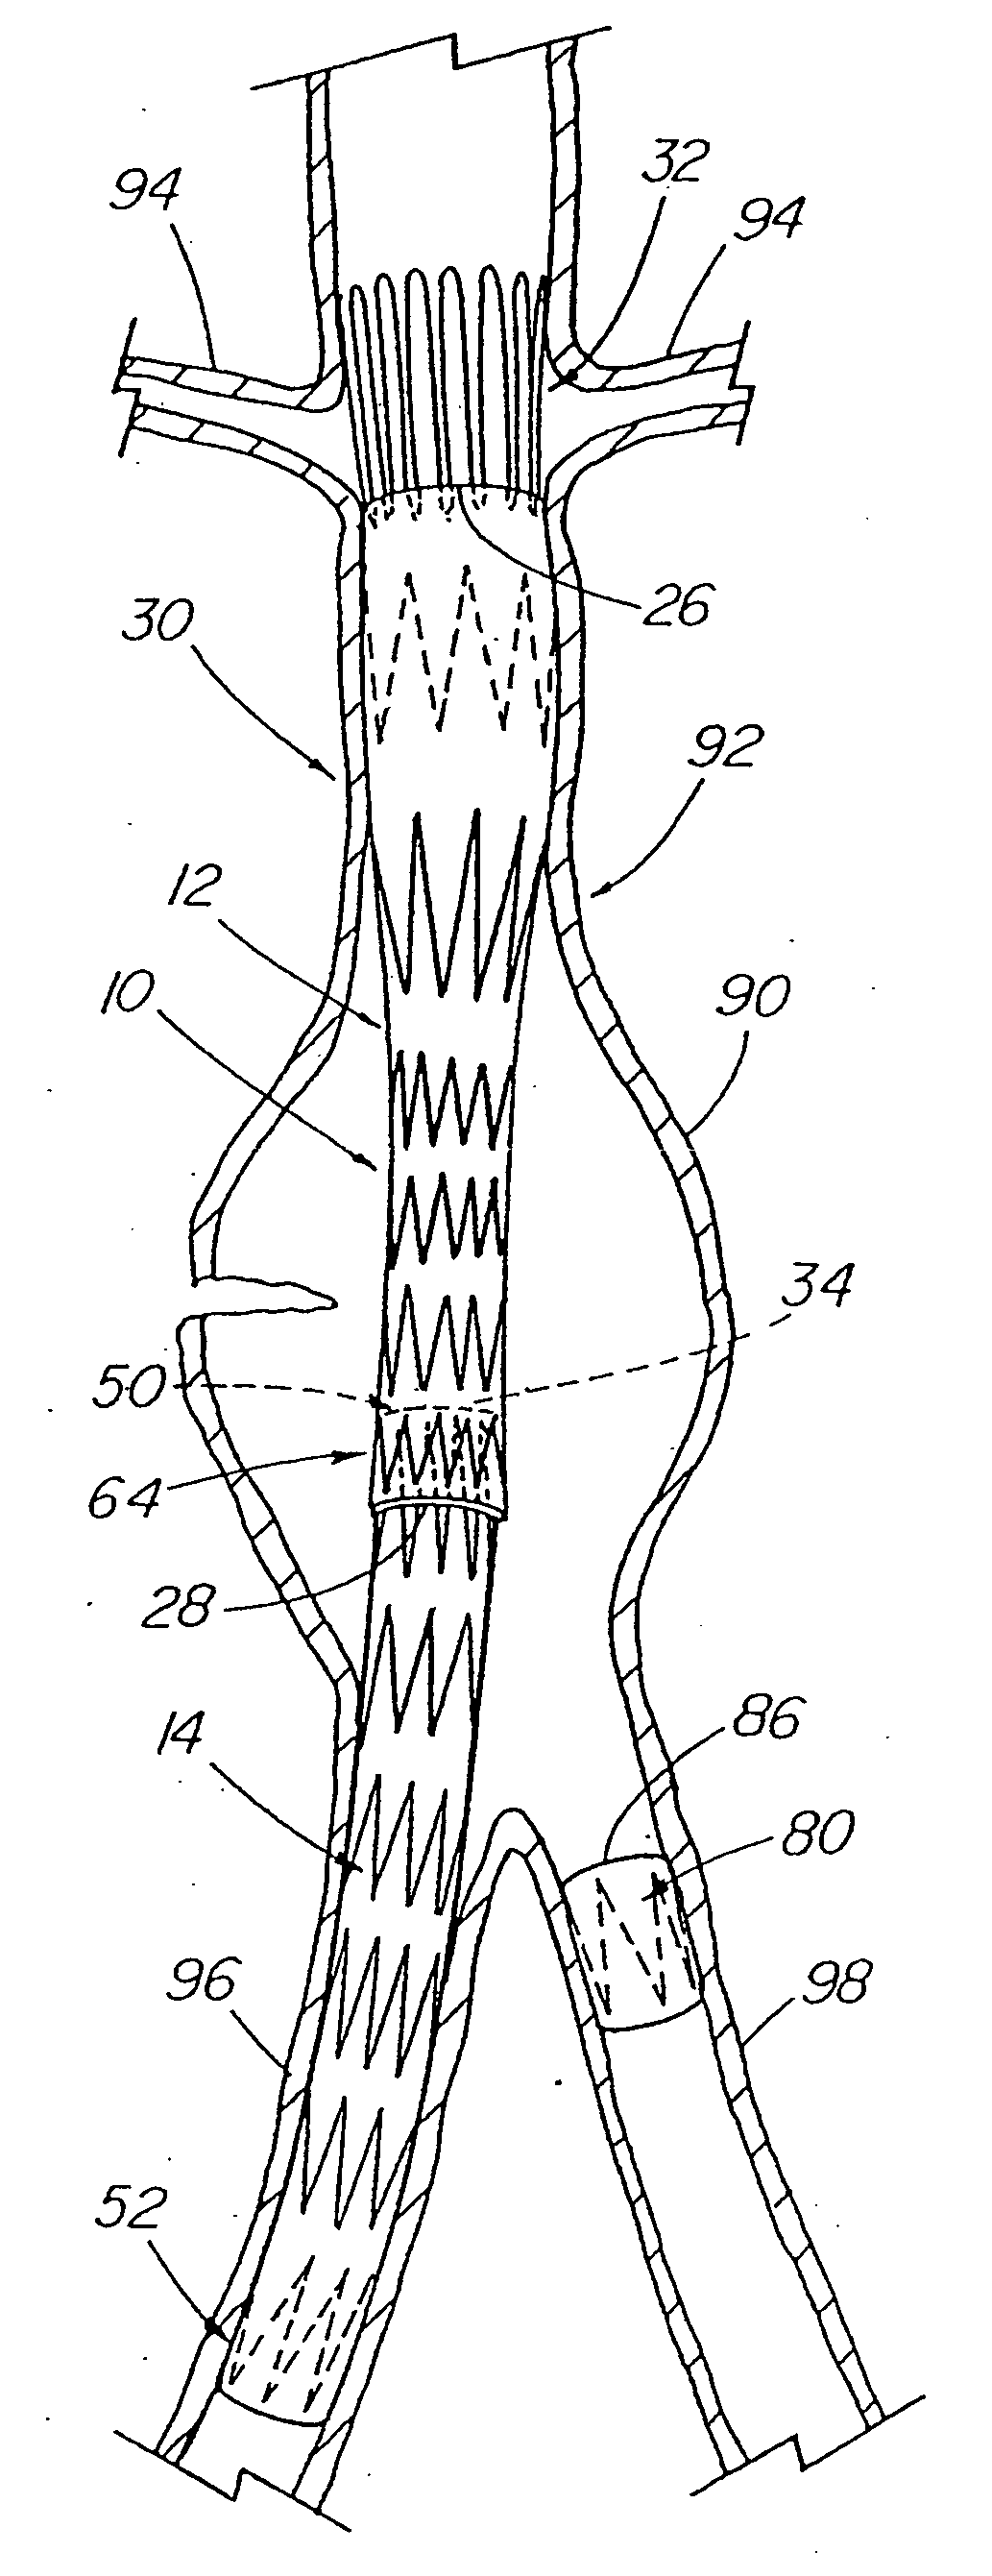 Modular stent graft assembly and use thereof